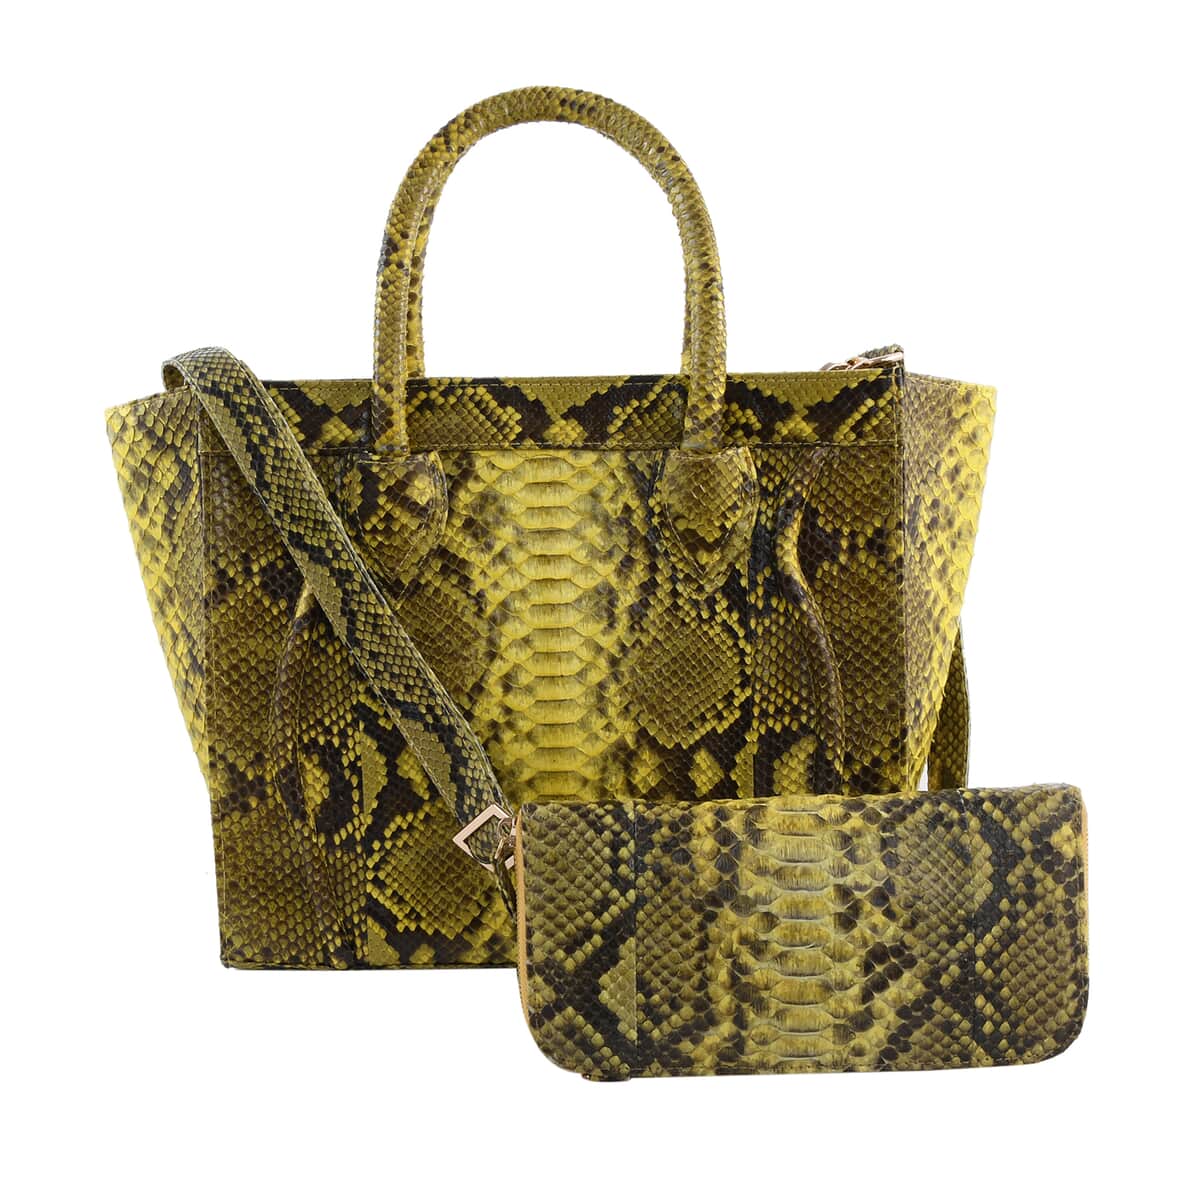 The Grand Pelle Handcrafted Yellow Color Genuine Python Leather Tote Bag for Women with Wallet, Designer Tote Bags, Ladies Purse, Shoulder Handbags, Leather Wallet image number 0